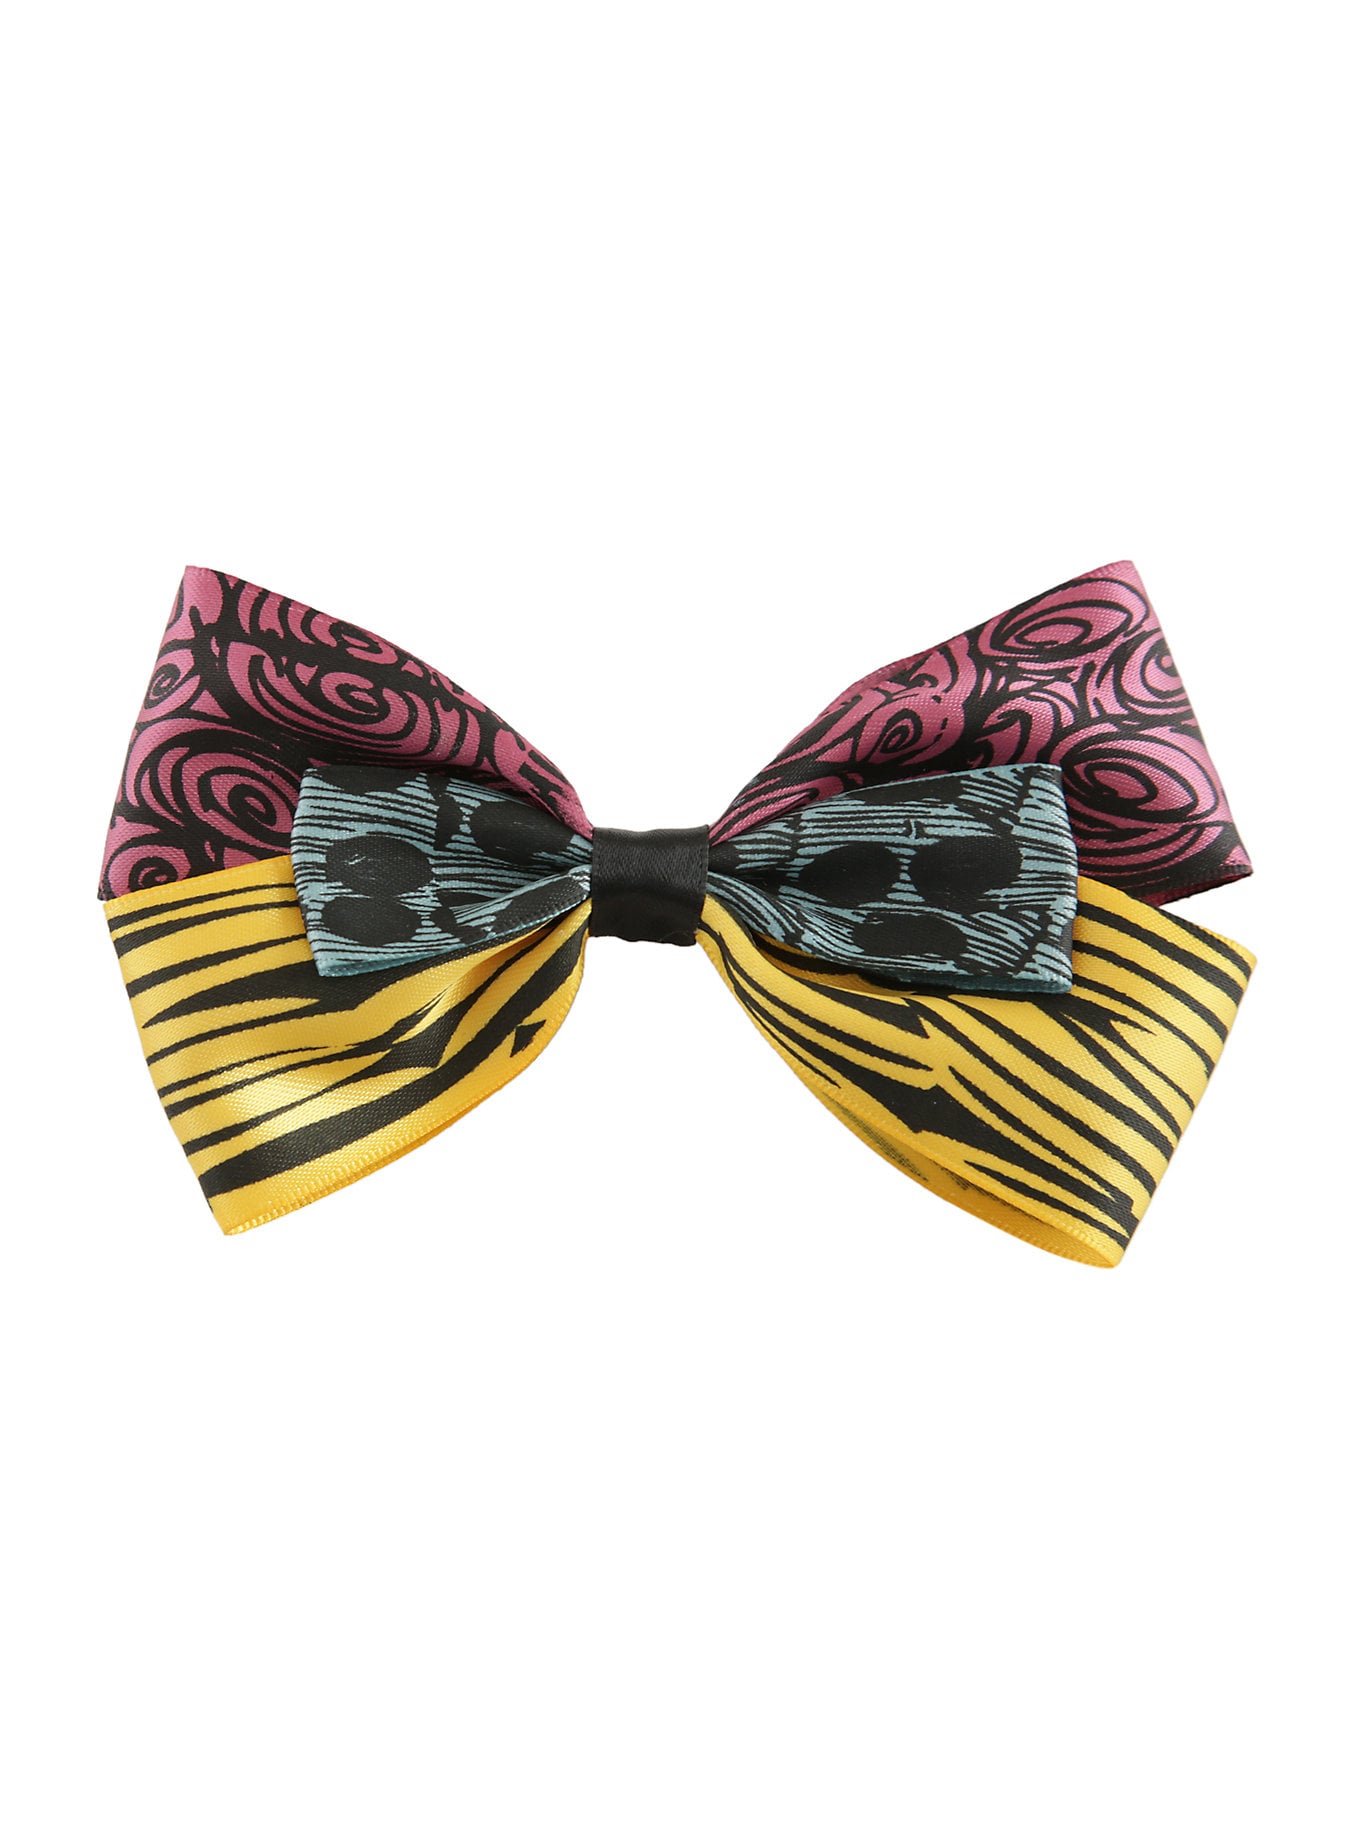 Nightmare bow by Inspired Bows Jack and Sally